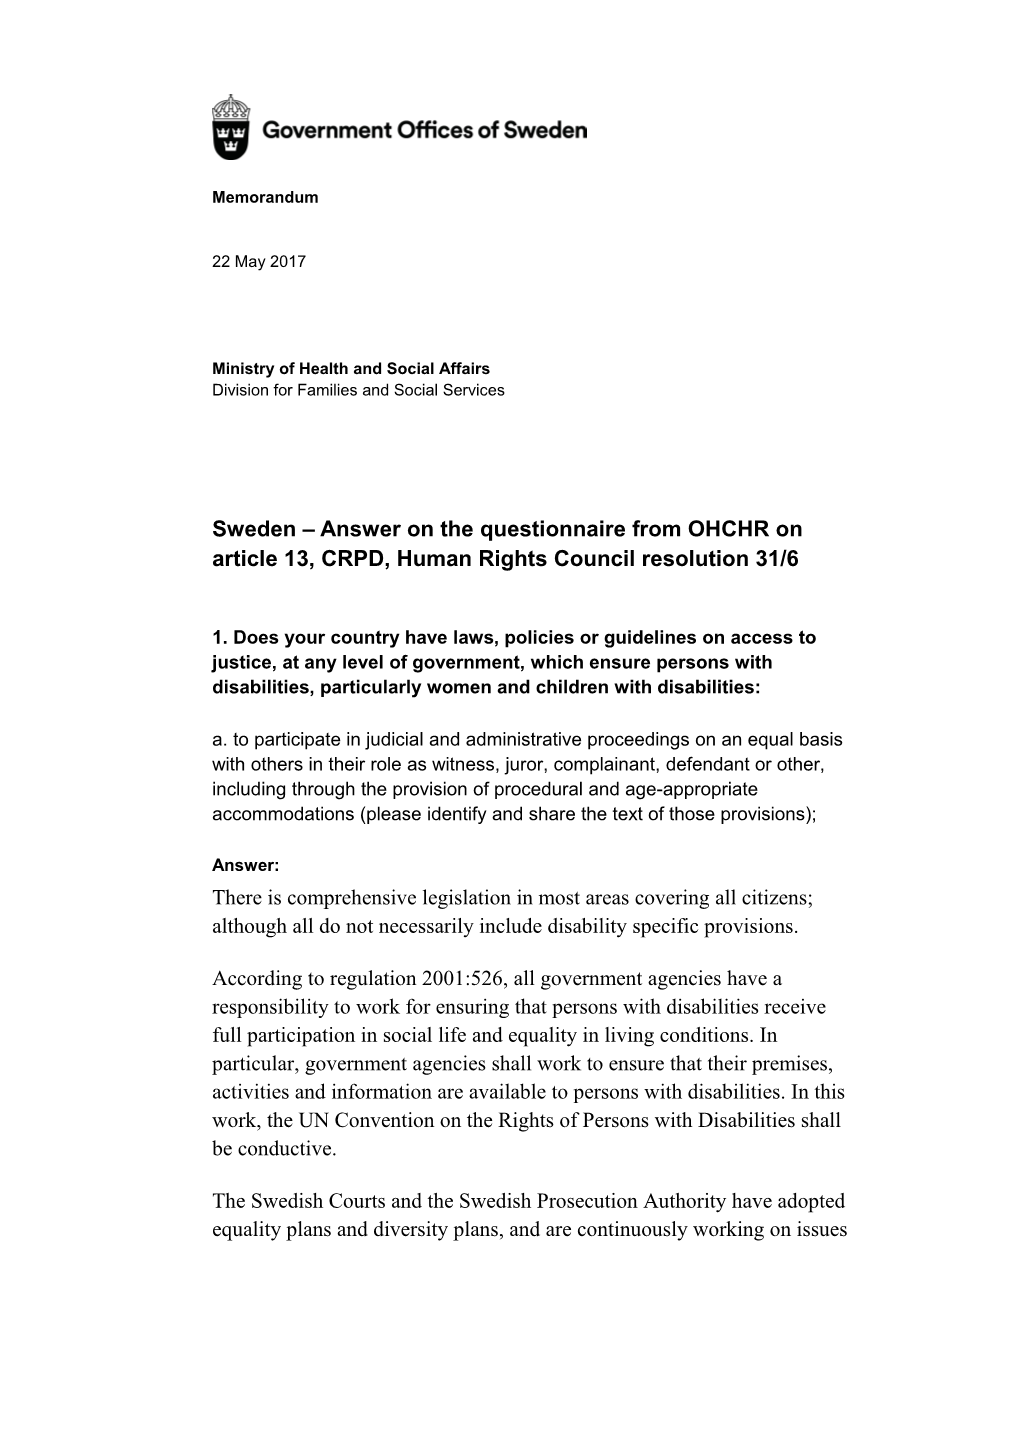 Sweden Answer on the Questionnaire from OHCHR on Article 13, CRPD, Human Rights Council